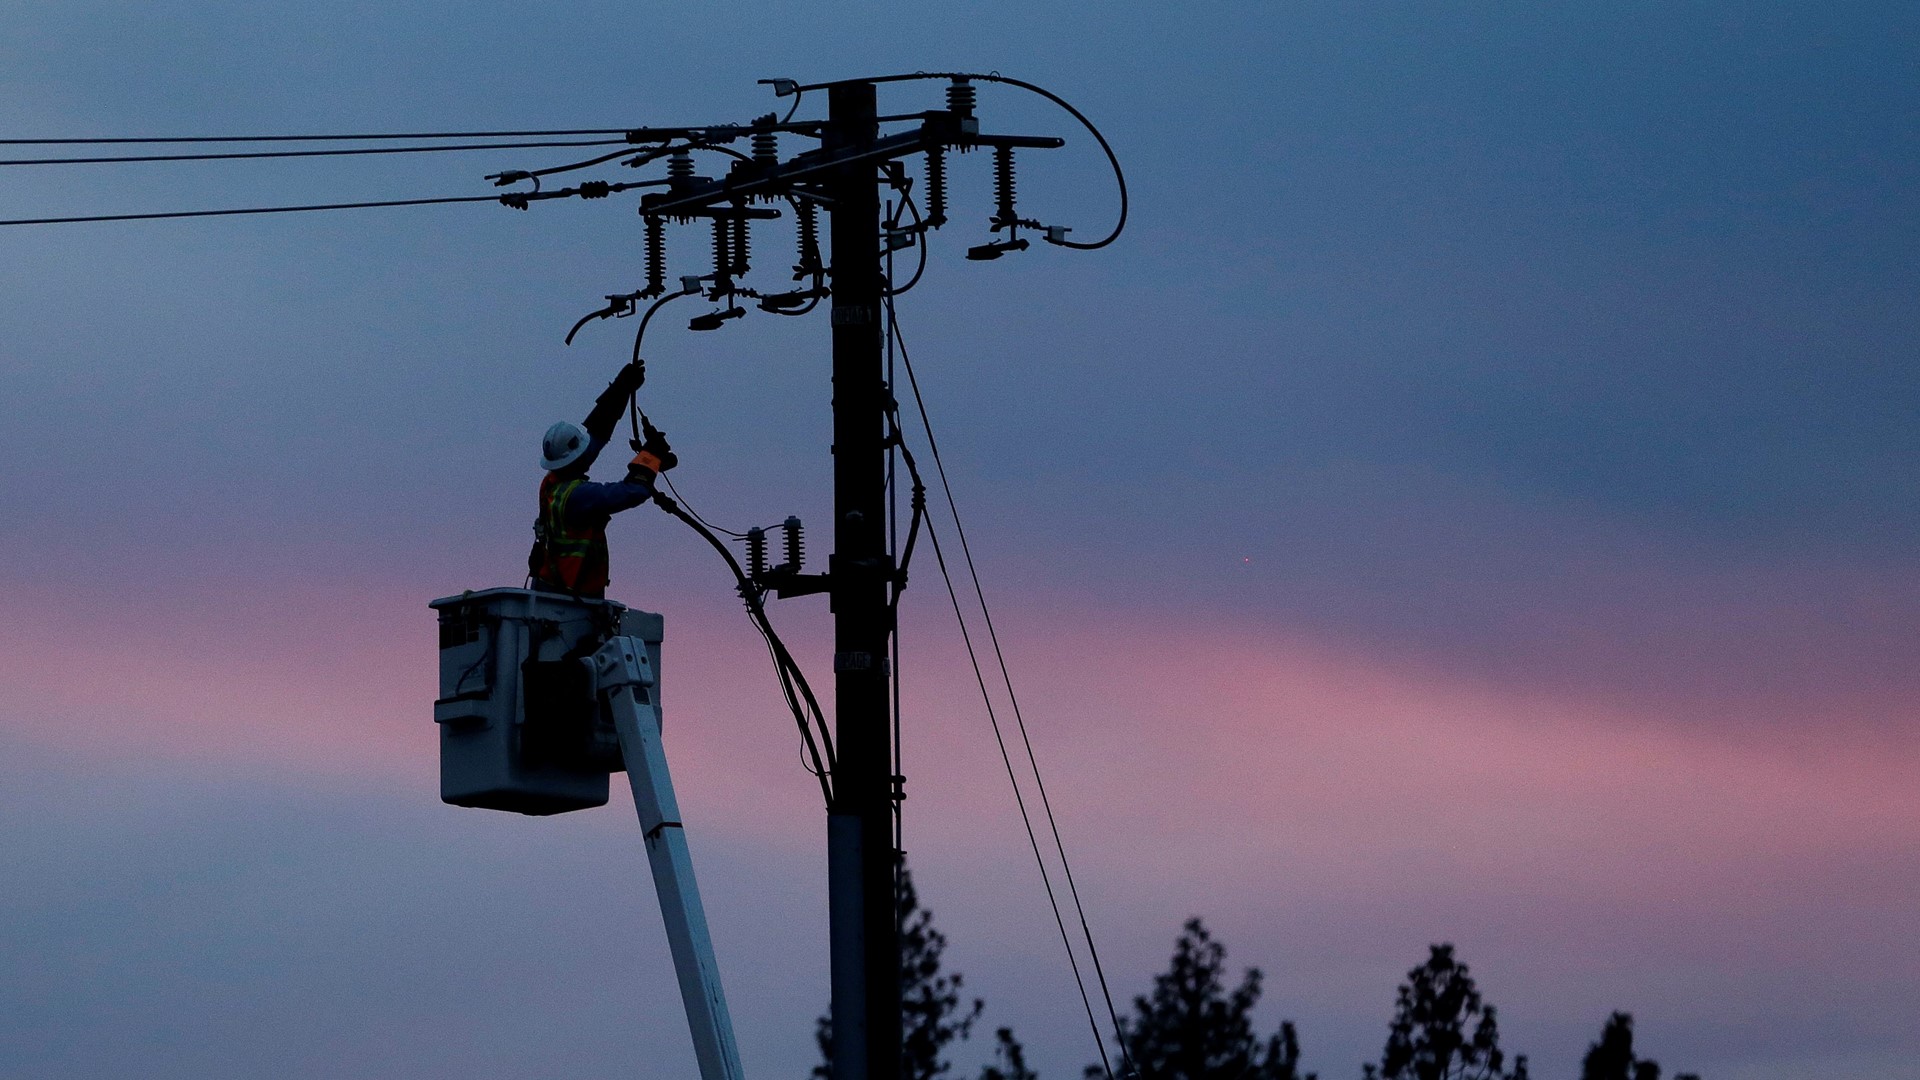 After PG&E announced their plan to shut off power, possibly for days, to try to prevent wildfires this season, hundreds of residents reached out voicing their concerns. ABC10’s Brandon Rittiman sat down to answer some of those questions.